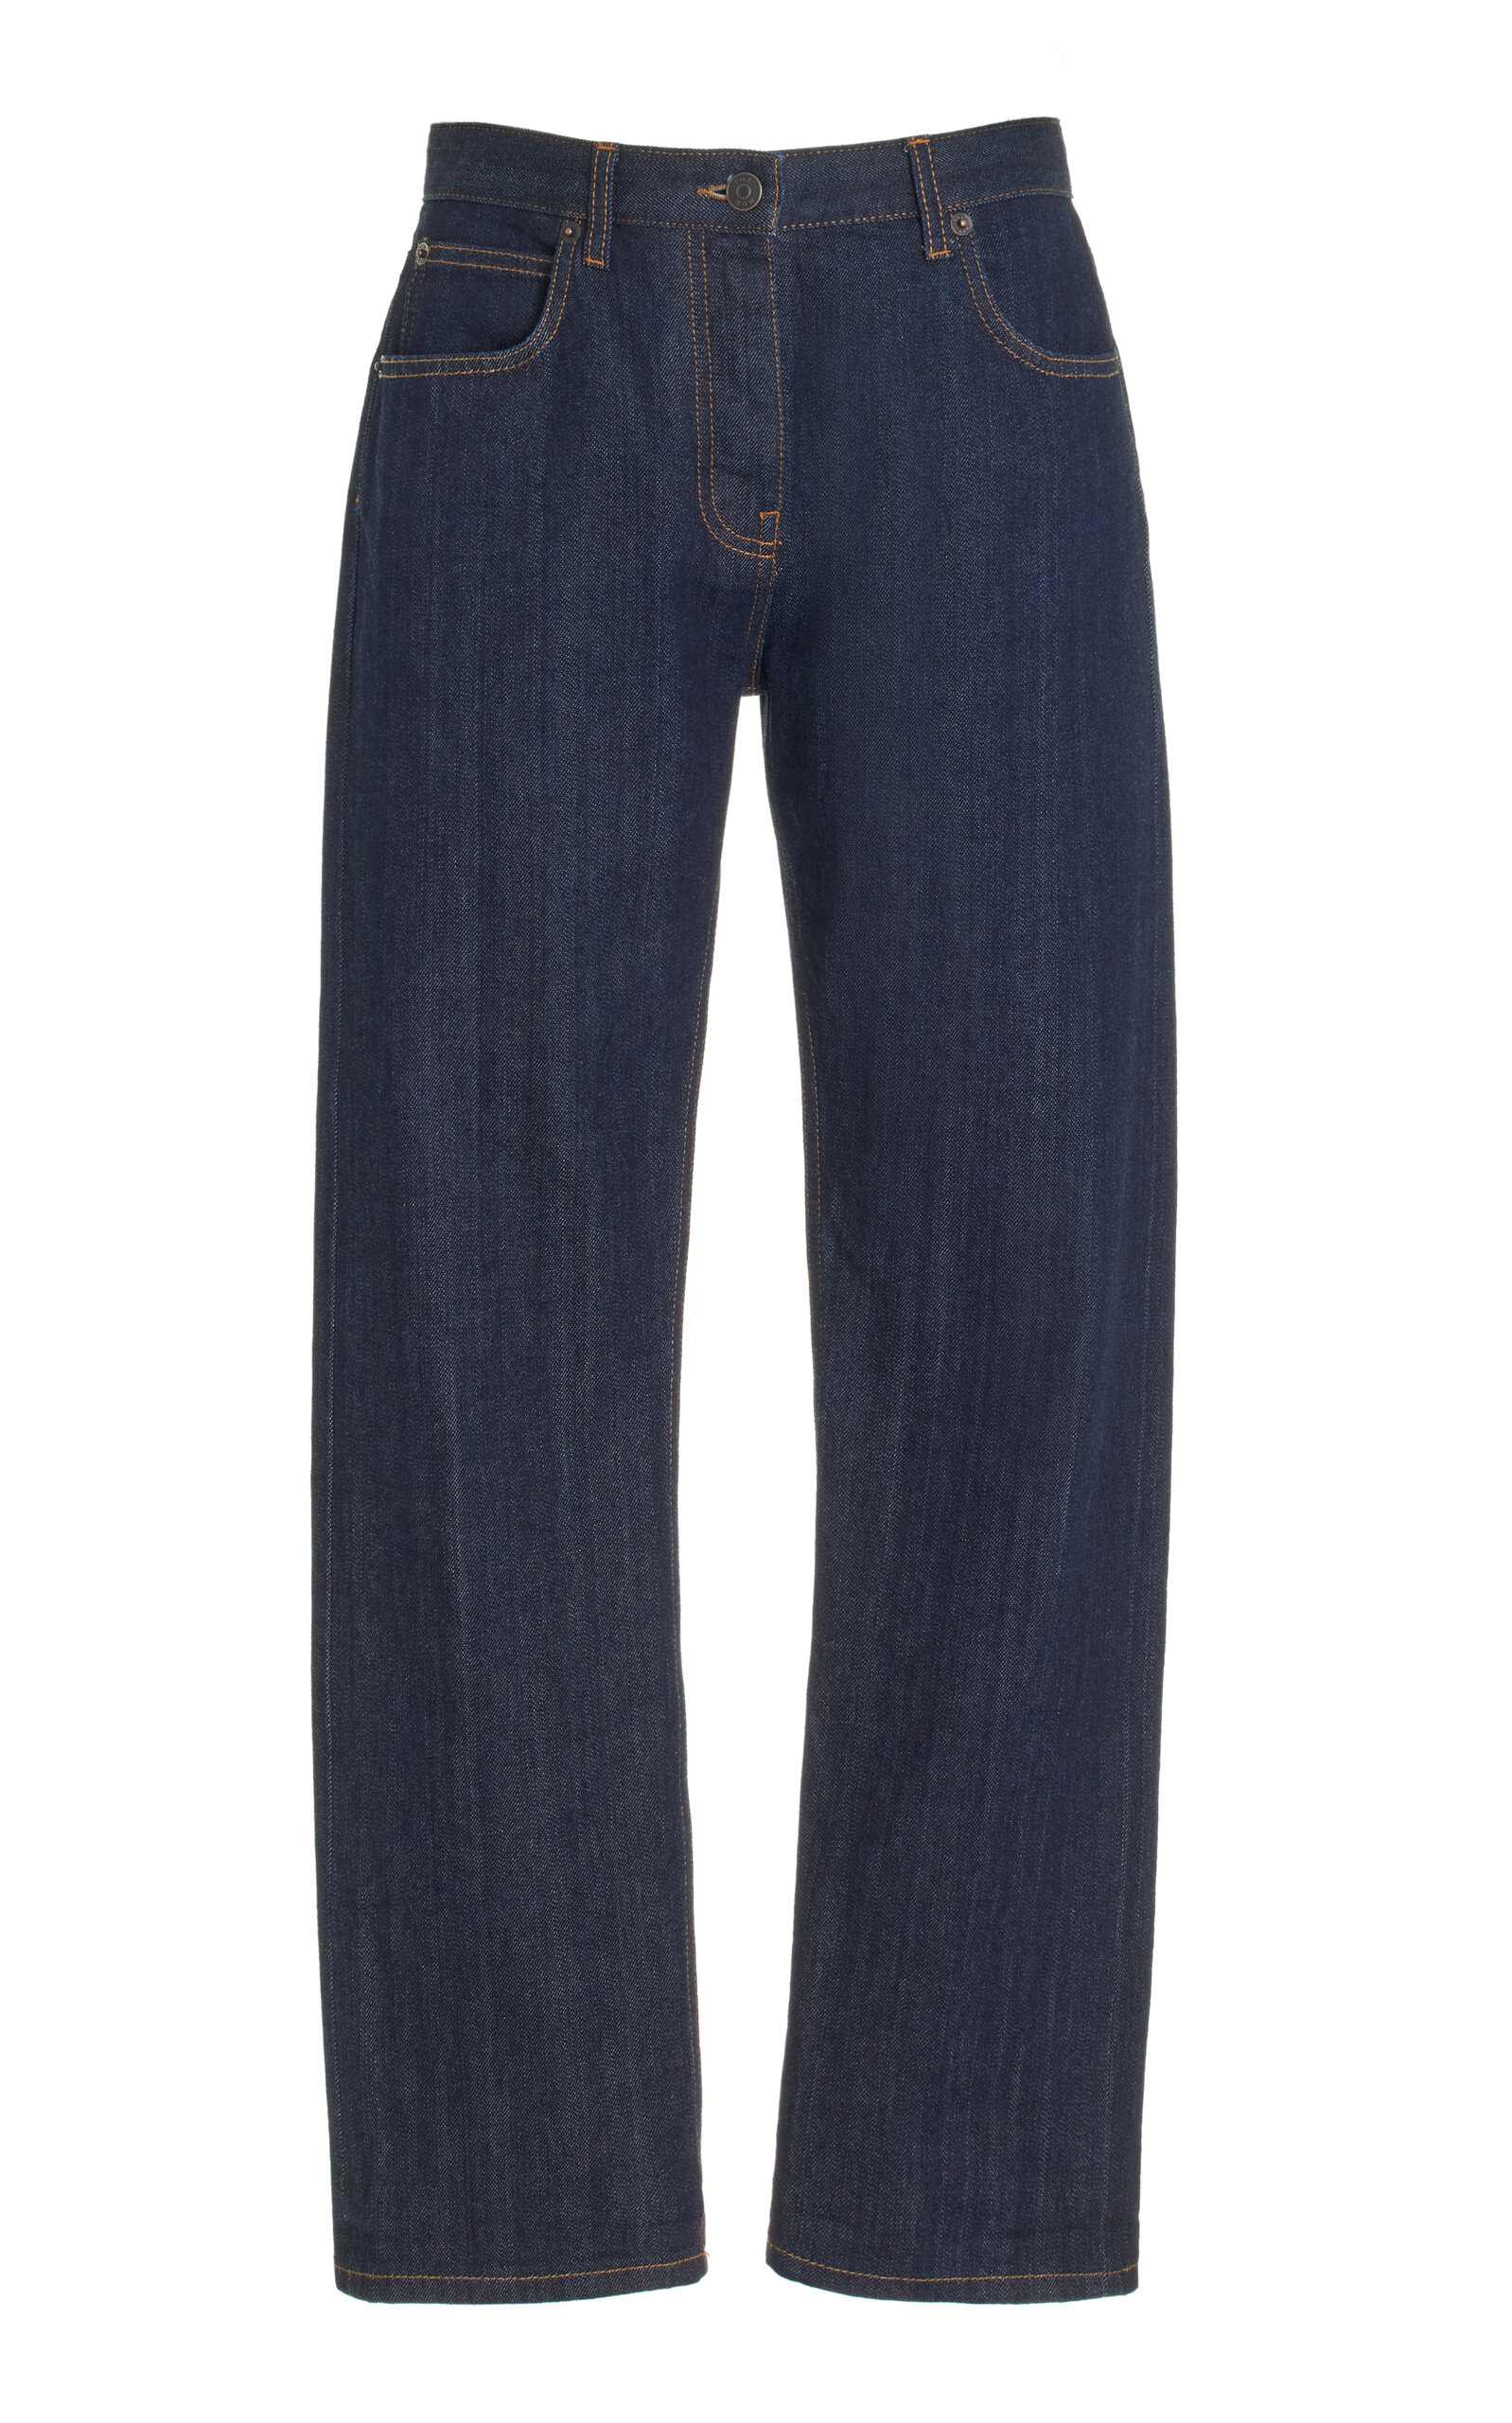 Riaco Selvedge Mid-Rise Skinny Jeans